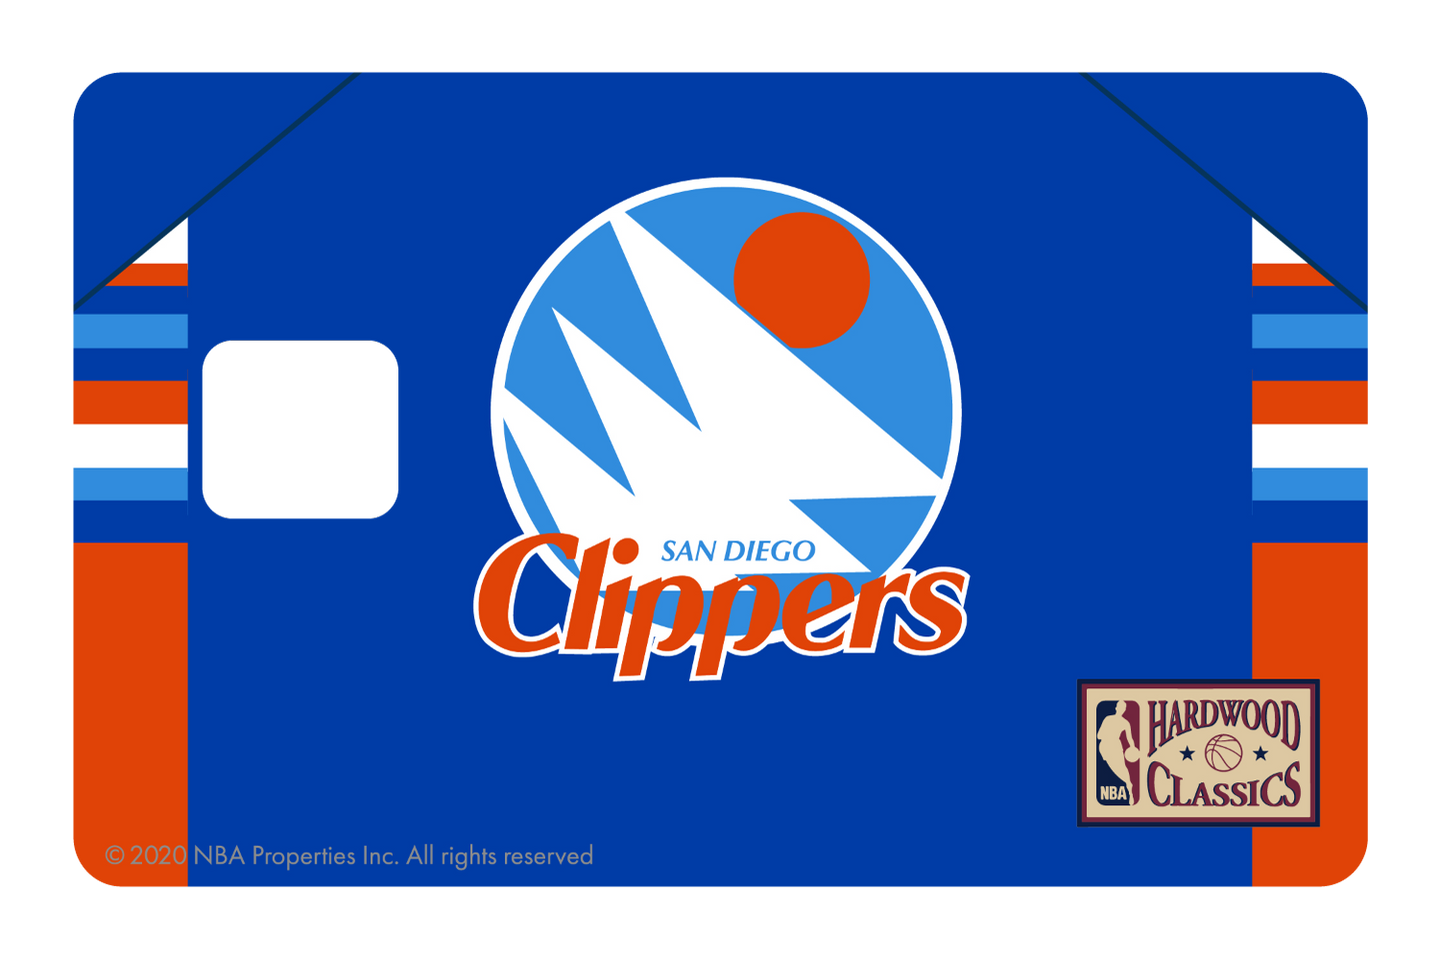 Los Angeles Clippers: Home Warmups Hardwood Classics